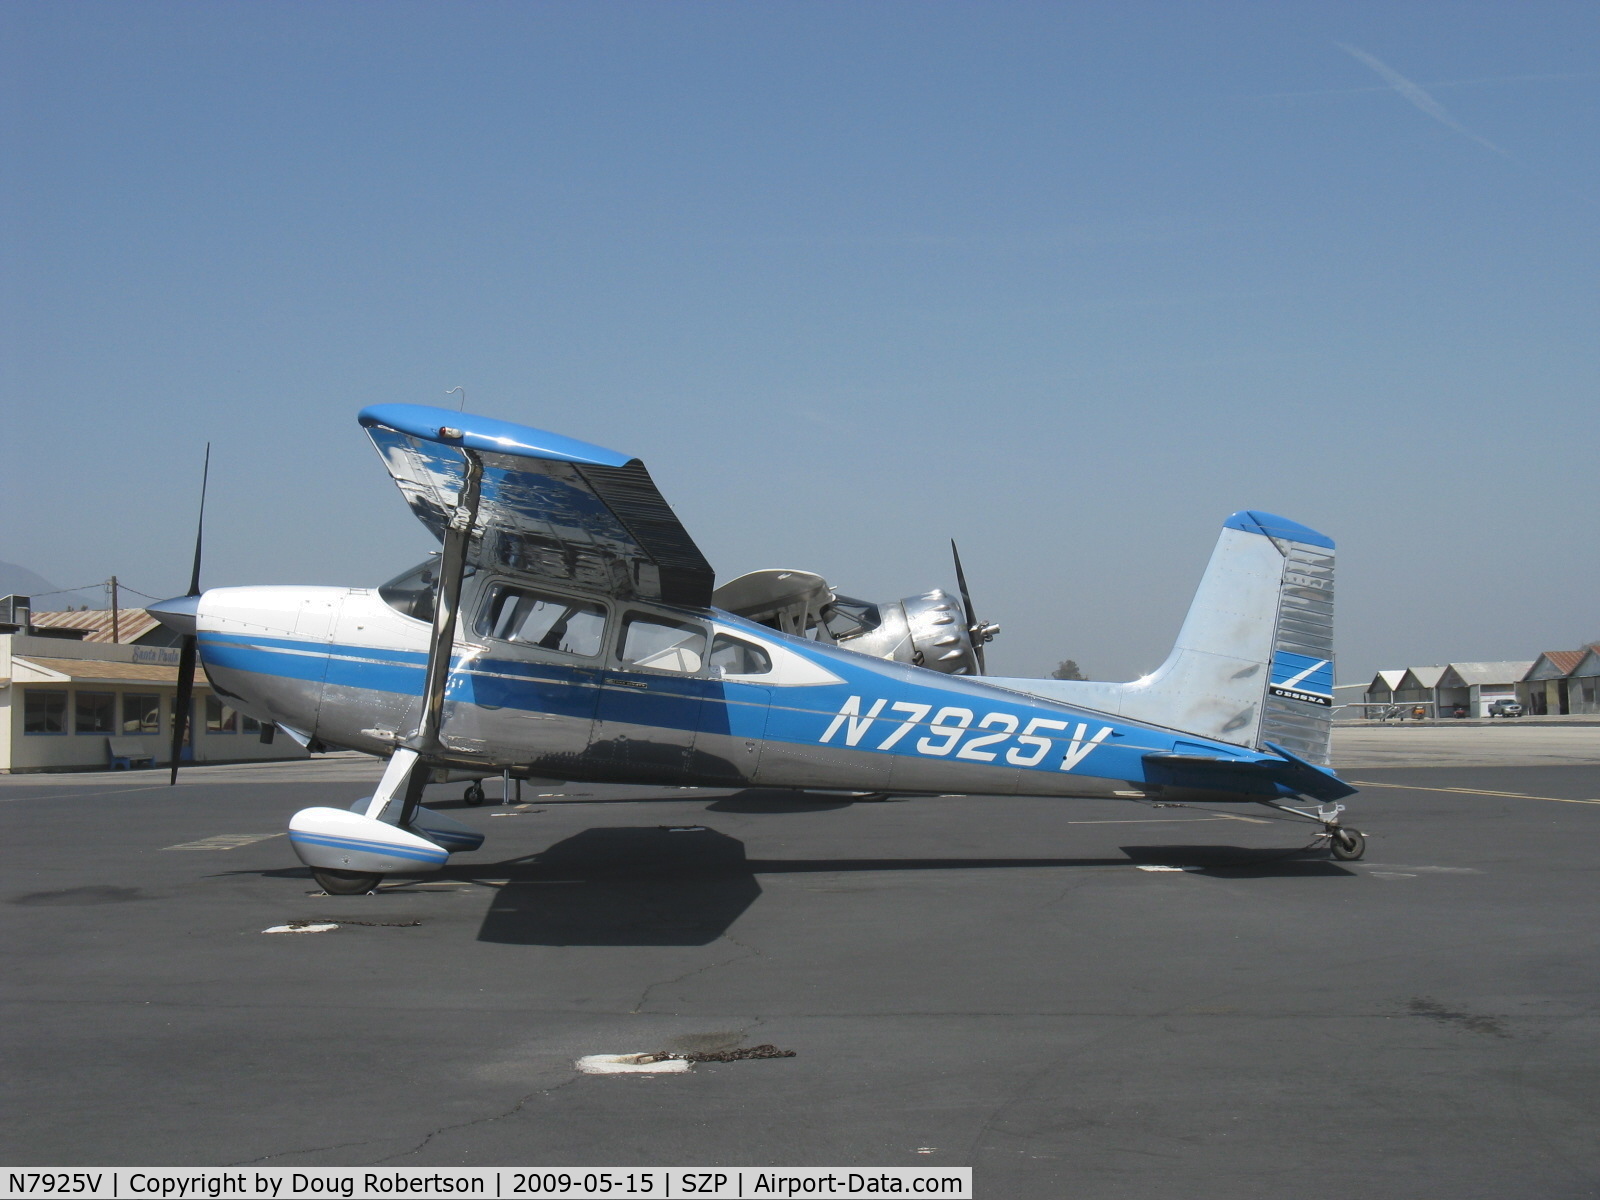 N7925V, 1966 Cessna 180H Skywagon C/N 18051825, 1966 Cessna 180H, Continental O-470 230 Hp, long-range extra fuel-24 gallons in outer wing tanks, highly mirror polished